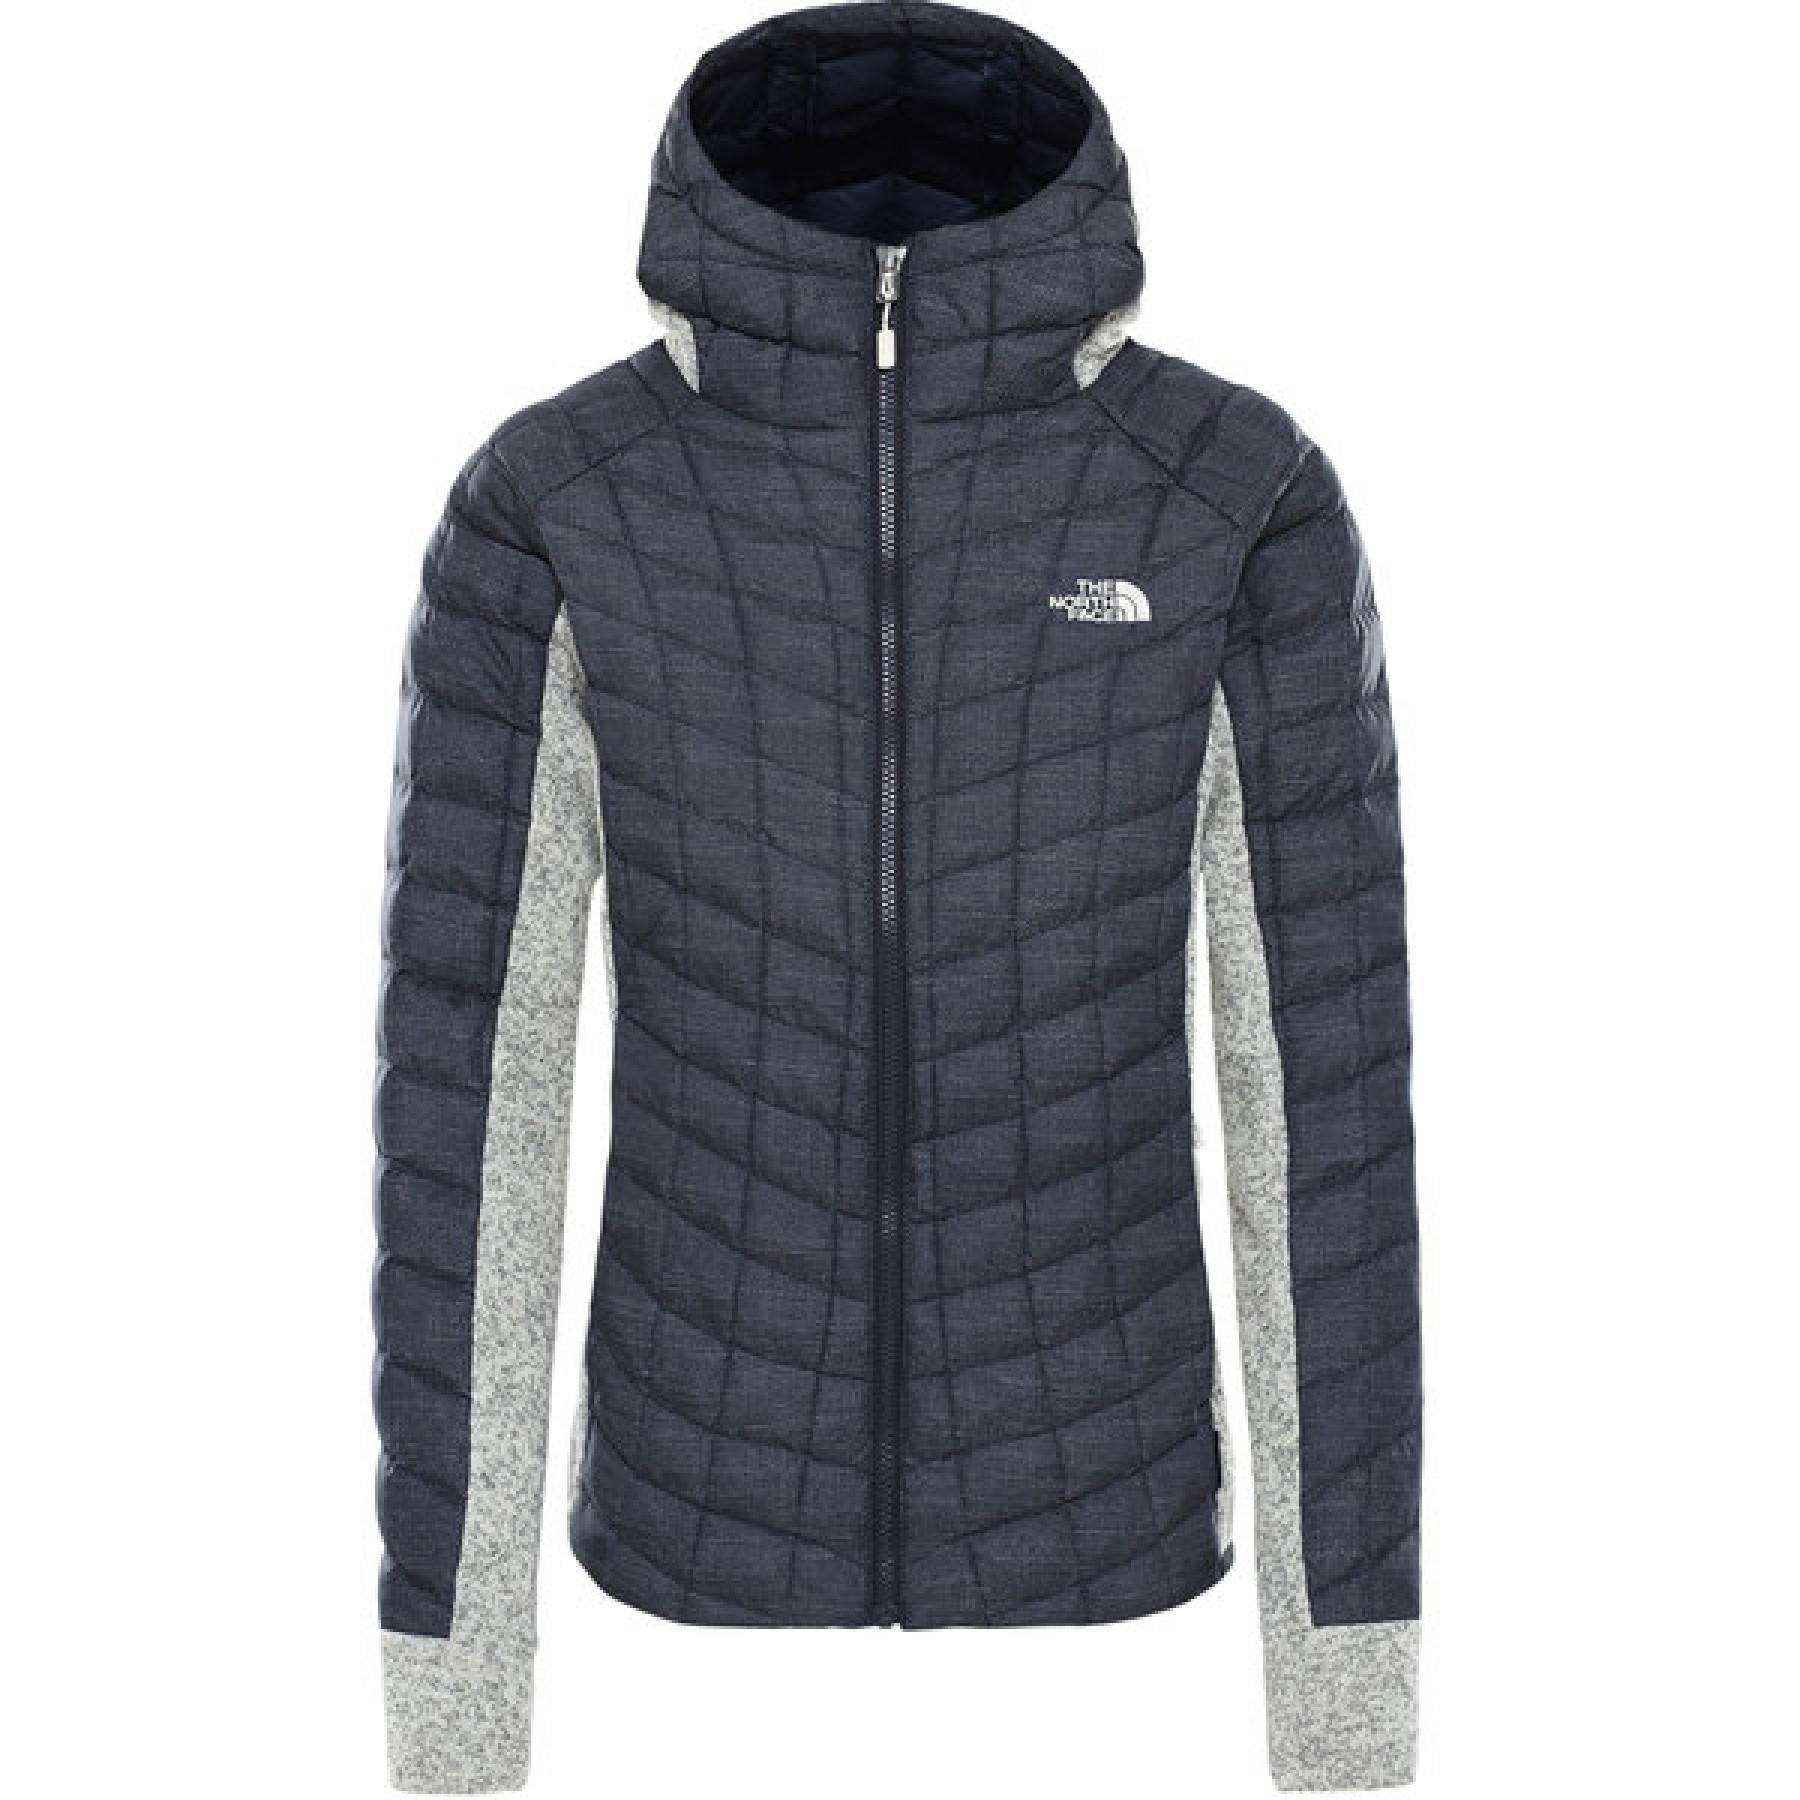 Veste polaire femme The North Face Thermoball Gordon